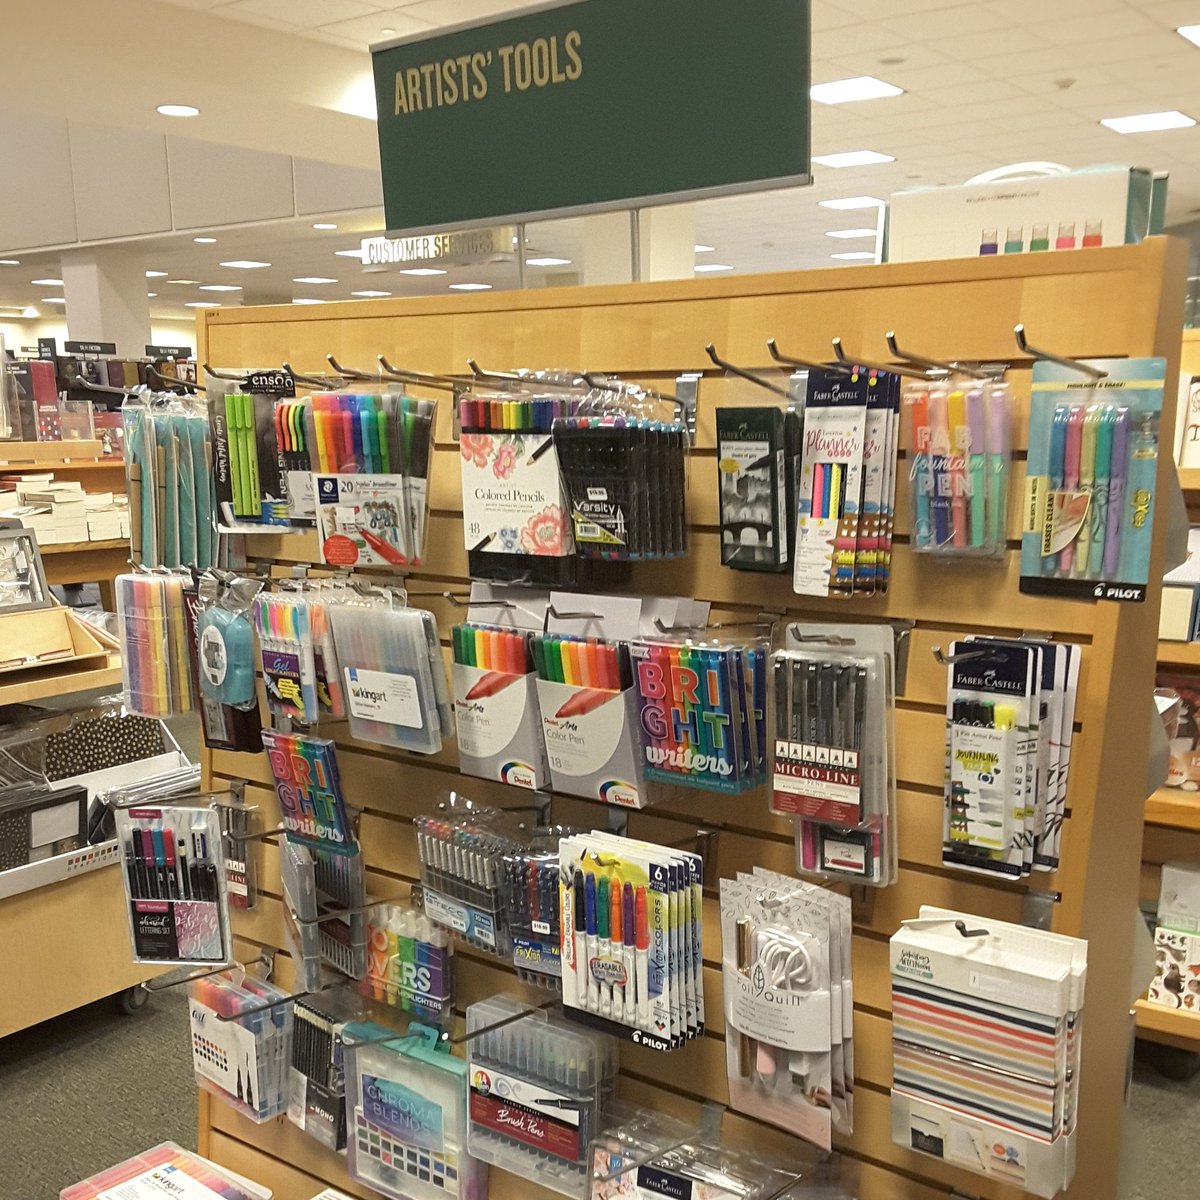 Make 2020 the year of art. Browse our art and artist supplies for everything you need to get yourself started on your artistic journey. #bnnewportbeach #barnesandnoble #fashionisland #142bn #artbook #art #artists #pens #paint #pastels #bobross #artisttools